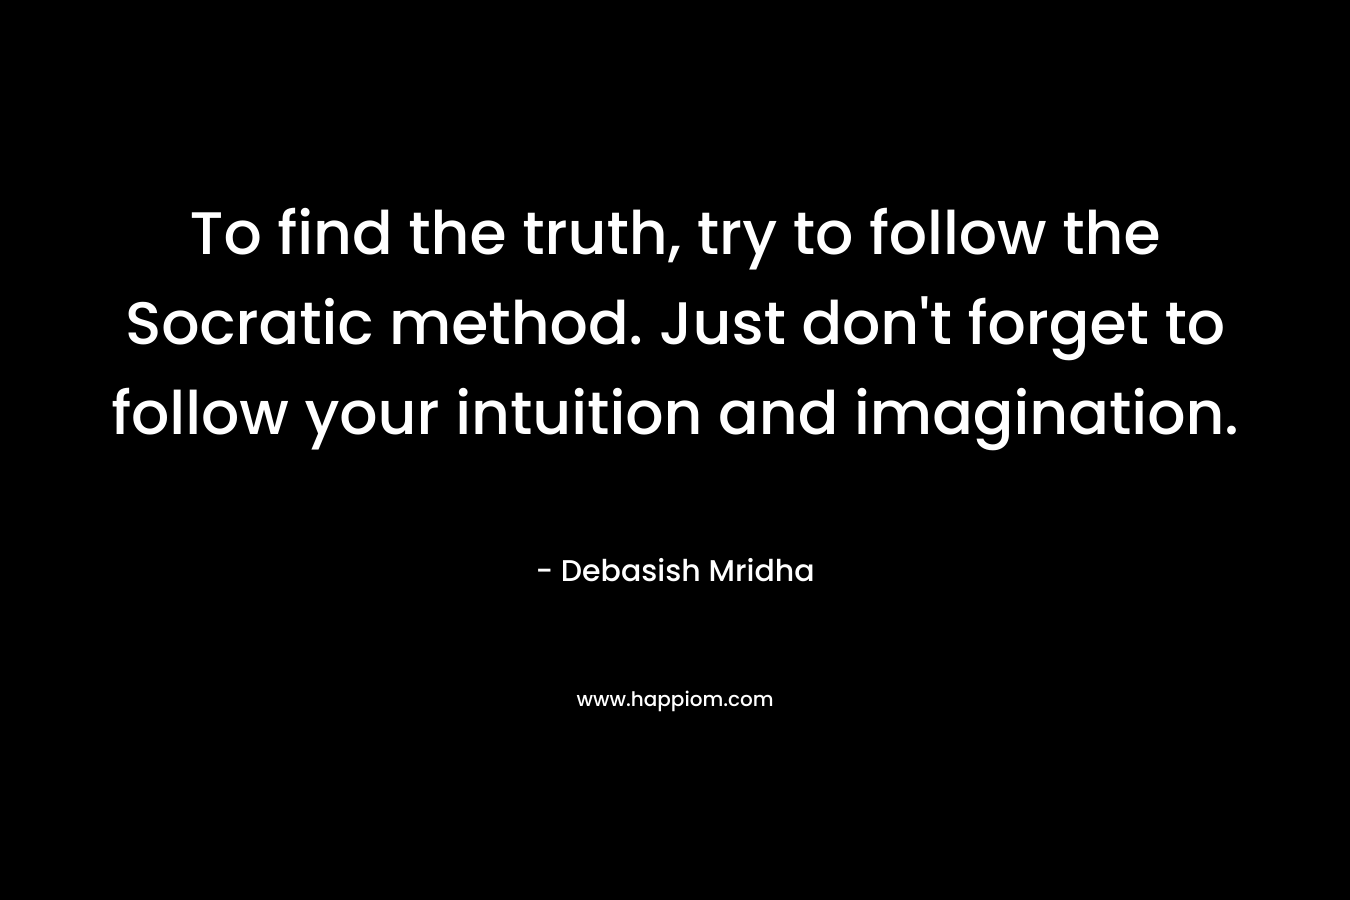 To find the truth, try to follow the Socratic method. Just don't forget to follow your intuition and imagination.